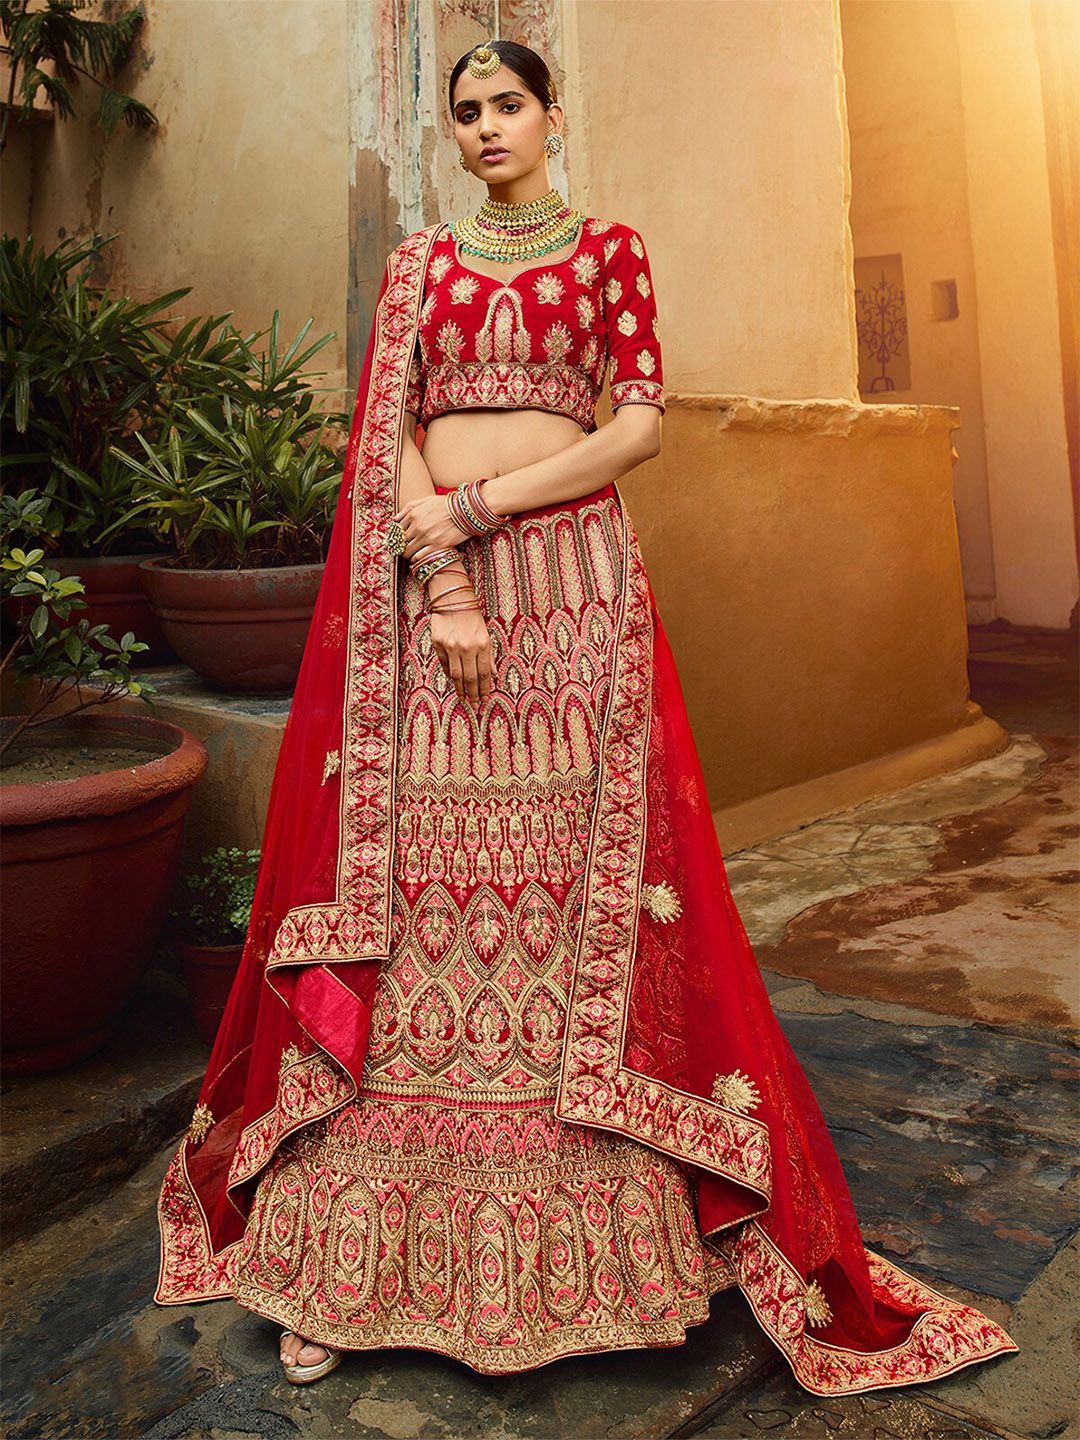 ODETTE Embellished Thread Work Semi-Stitched Lehenga & Unstitched Blouse With Dupatta Price in India